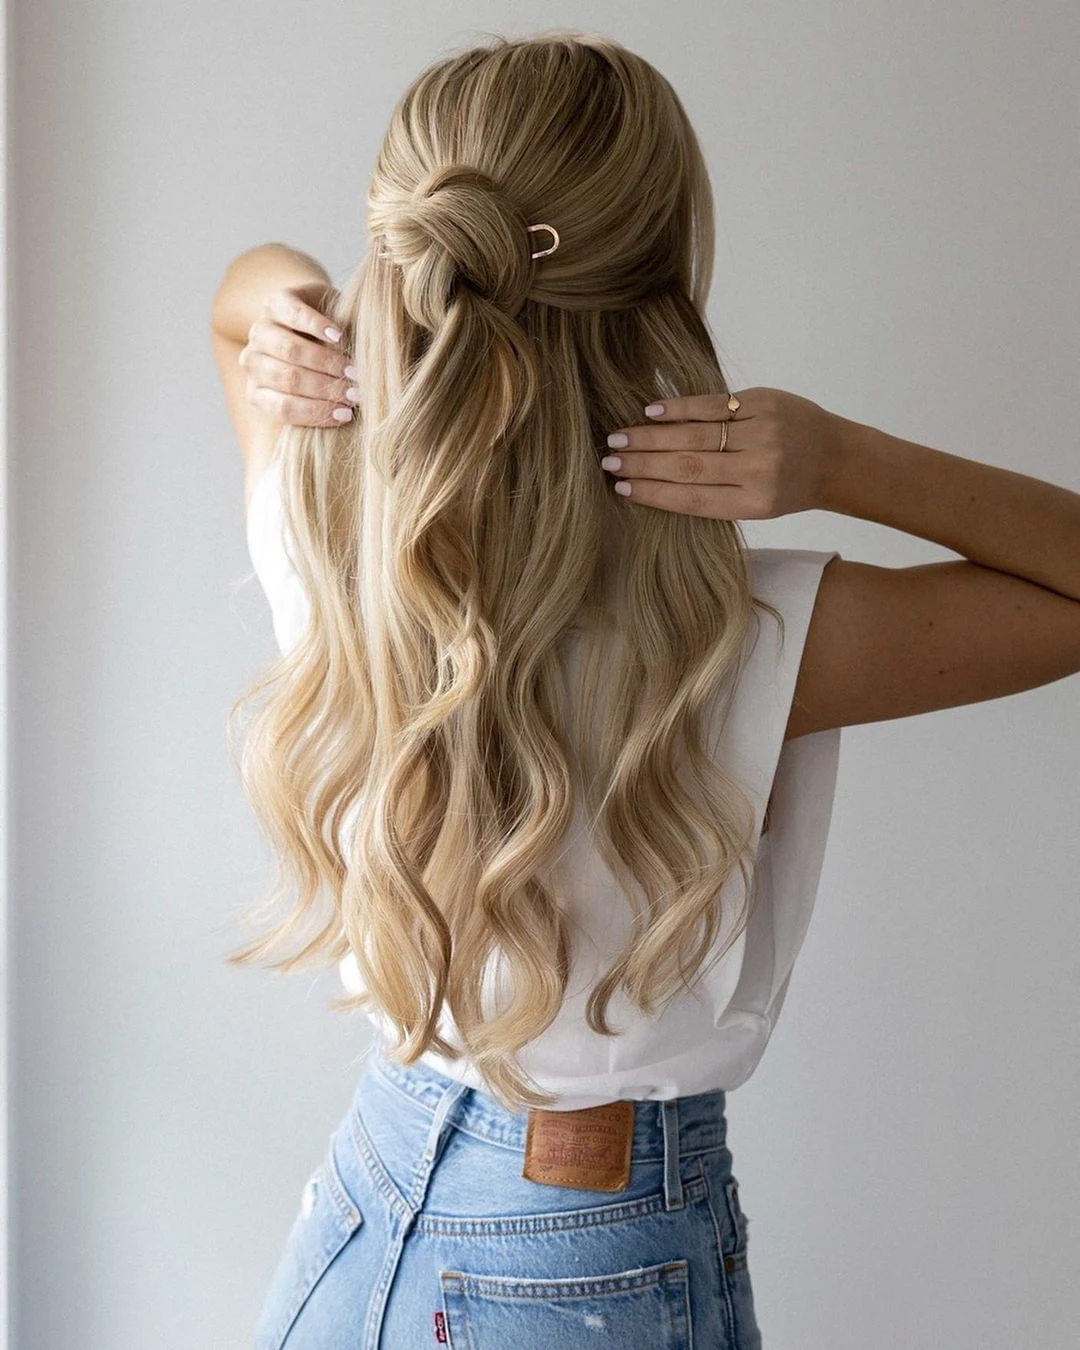 29 Quick and easy hairstyles perfect for prom, weddings, graduation and ...